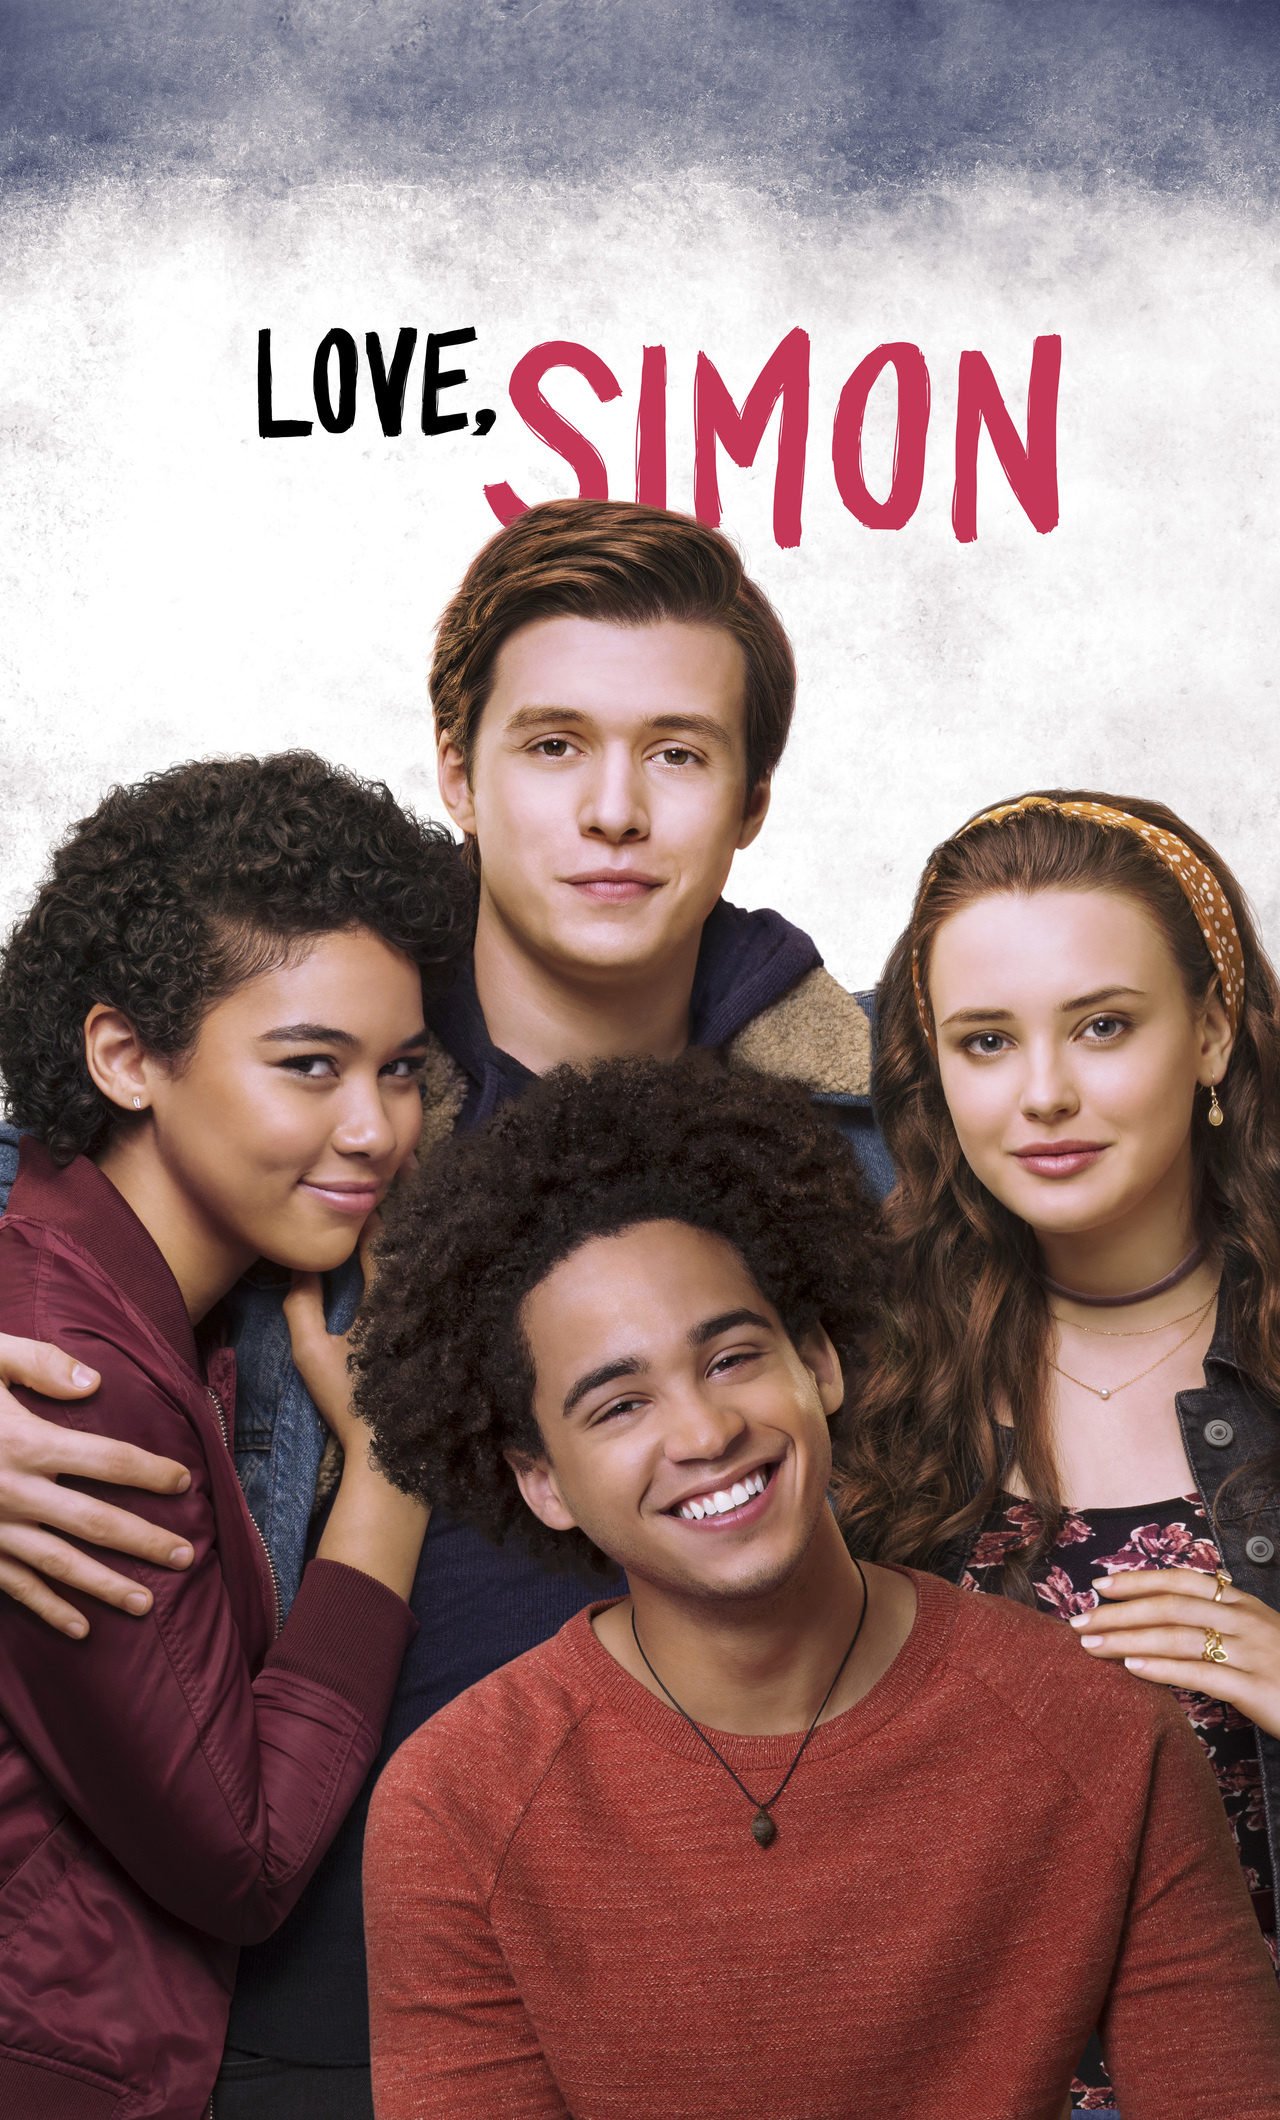 Love, Simon movie, Eye-catching wallpapers, Crystal-clear images, Stunning visuals, 1280x2120 HD Handy